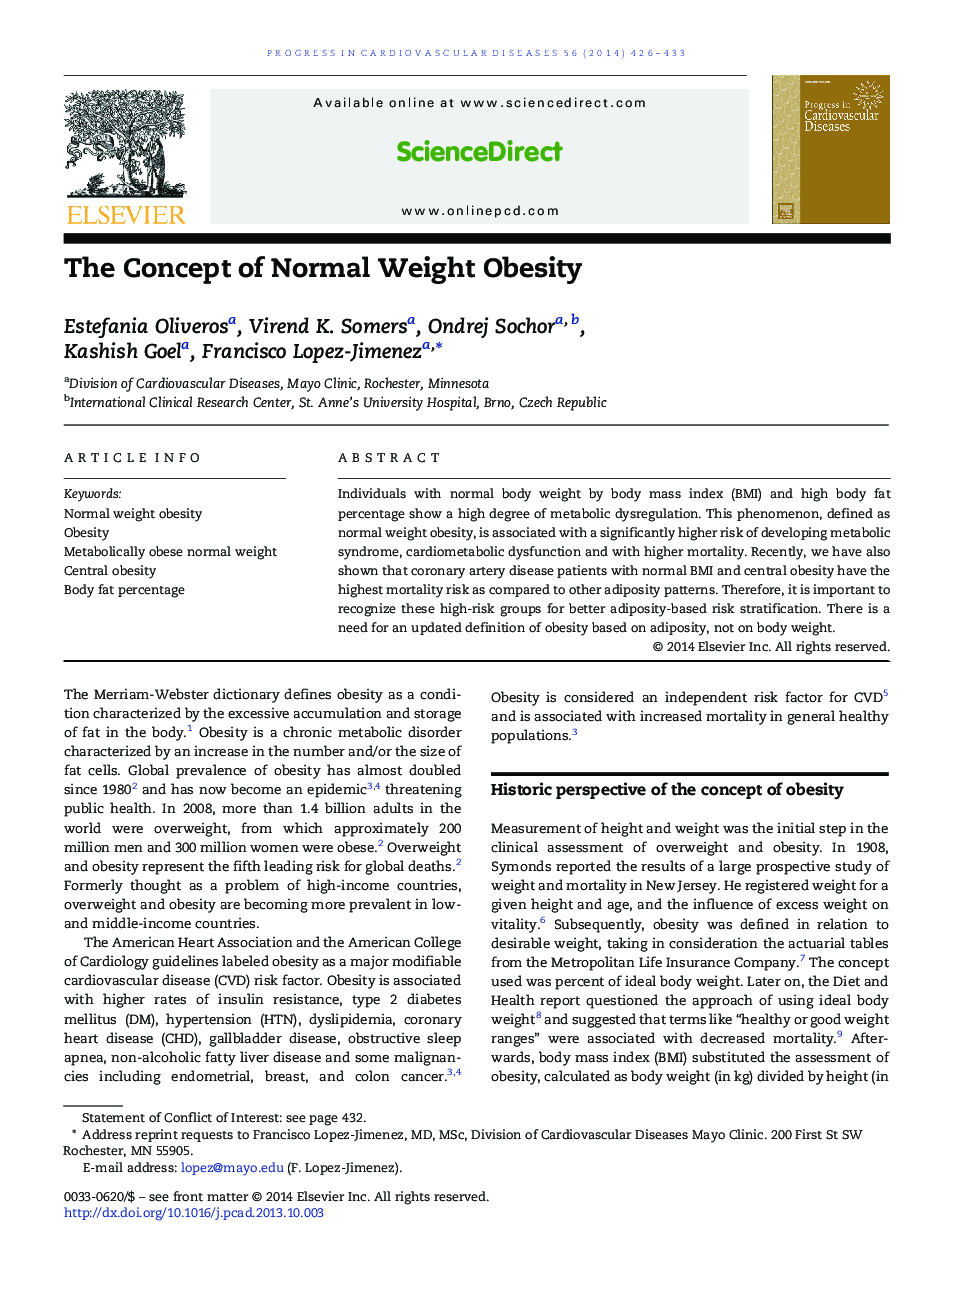 The Concept of Normal Weight Obesity 